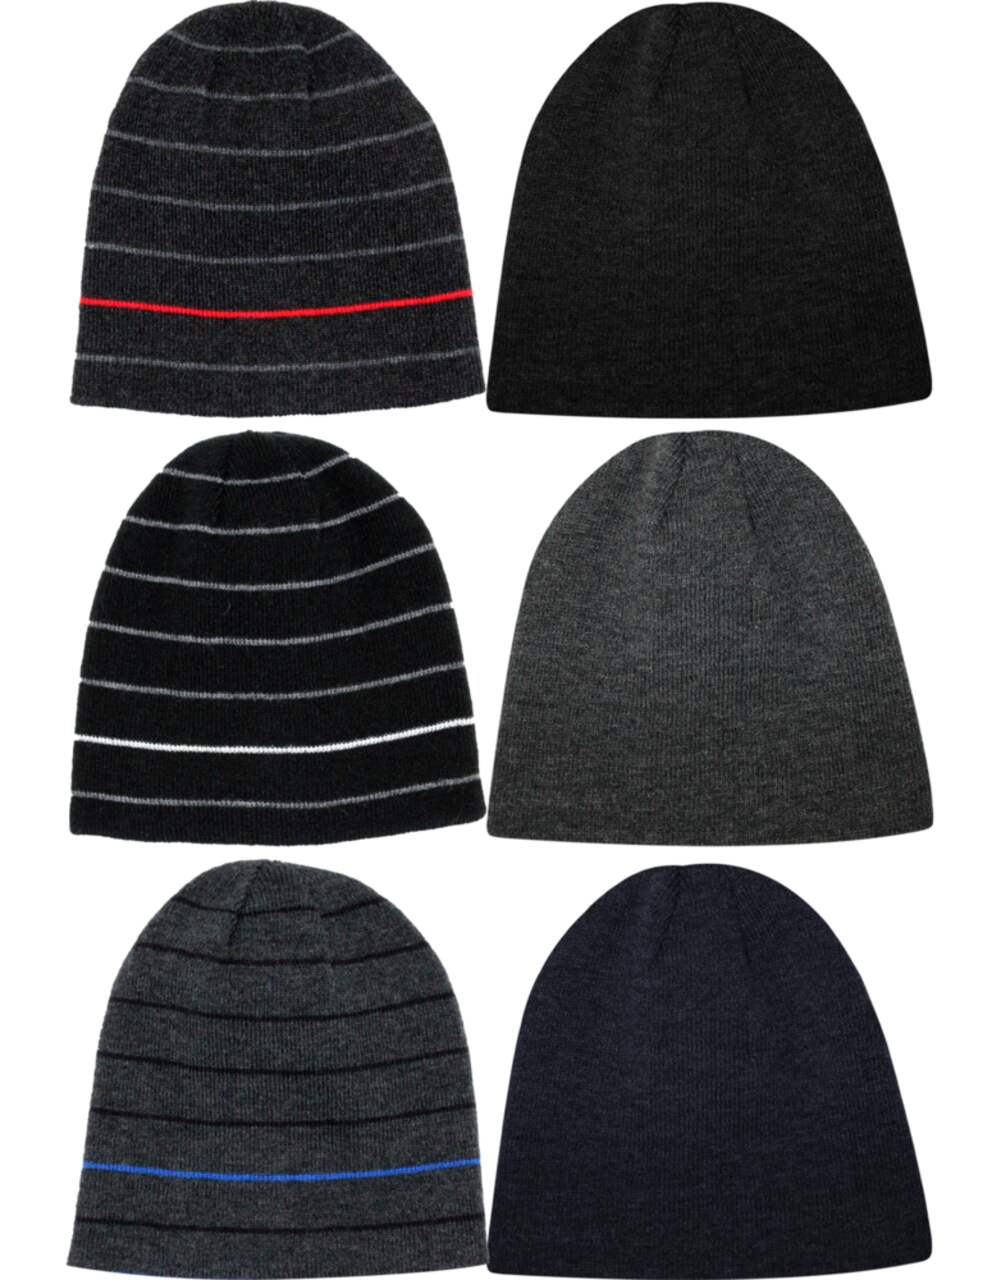 https://media-www.canadiantire.ca/product/playing/footwear-apparel/winter-footwear-apparel/1872996/mens-hot-paws-2pack-knit-beanies-o-s-62933b20-9f9e-4524-bbe8-bf5294e98b8b.png?imdensity=1&imwidth=640&impolicy=mZoom